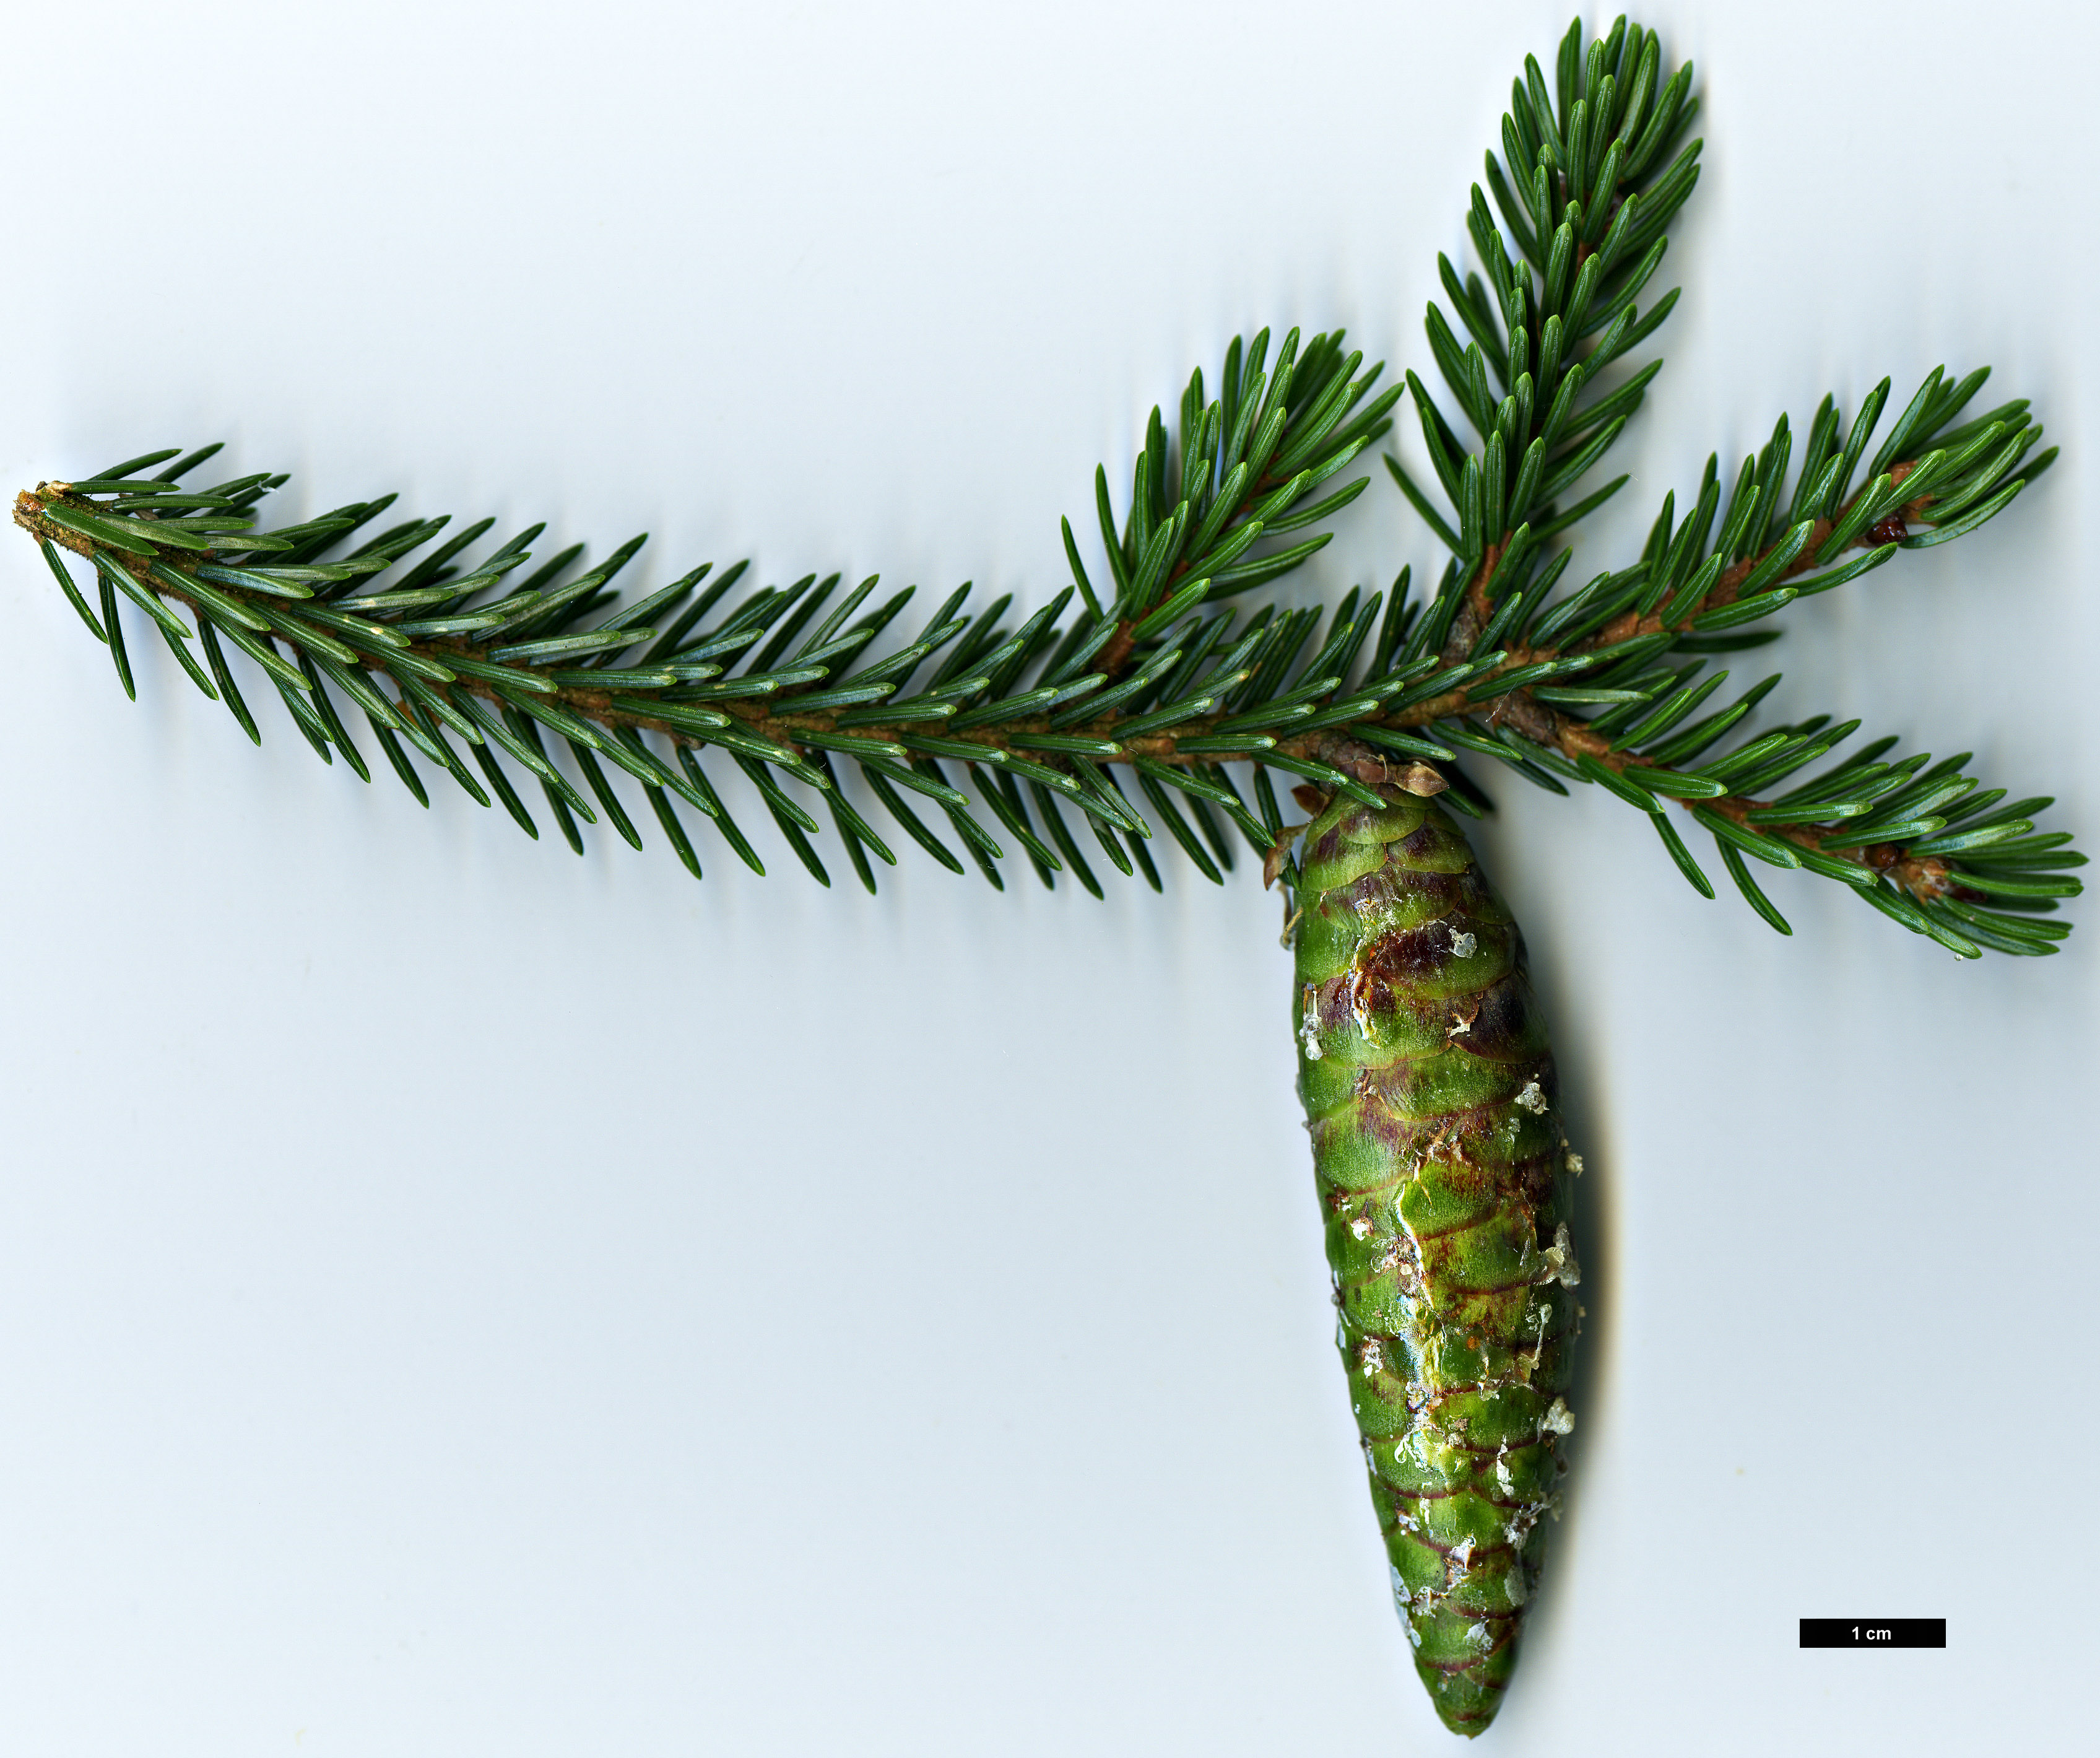 High resolution image: Family: Pinaceae - Genus: Picea - Taxon: maximowiczii